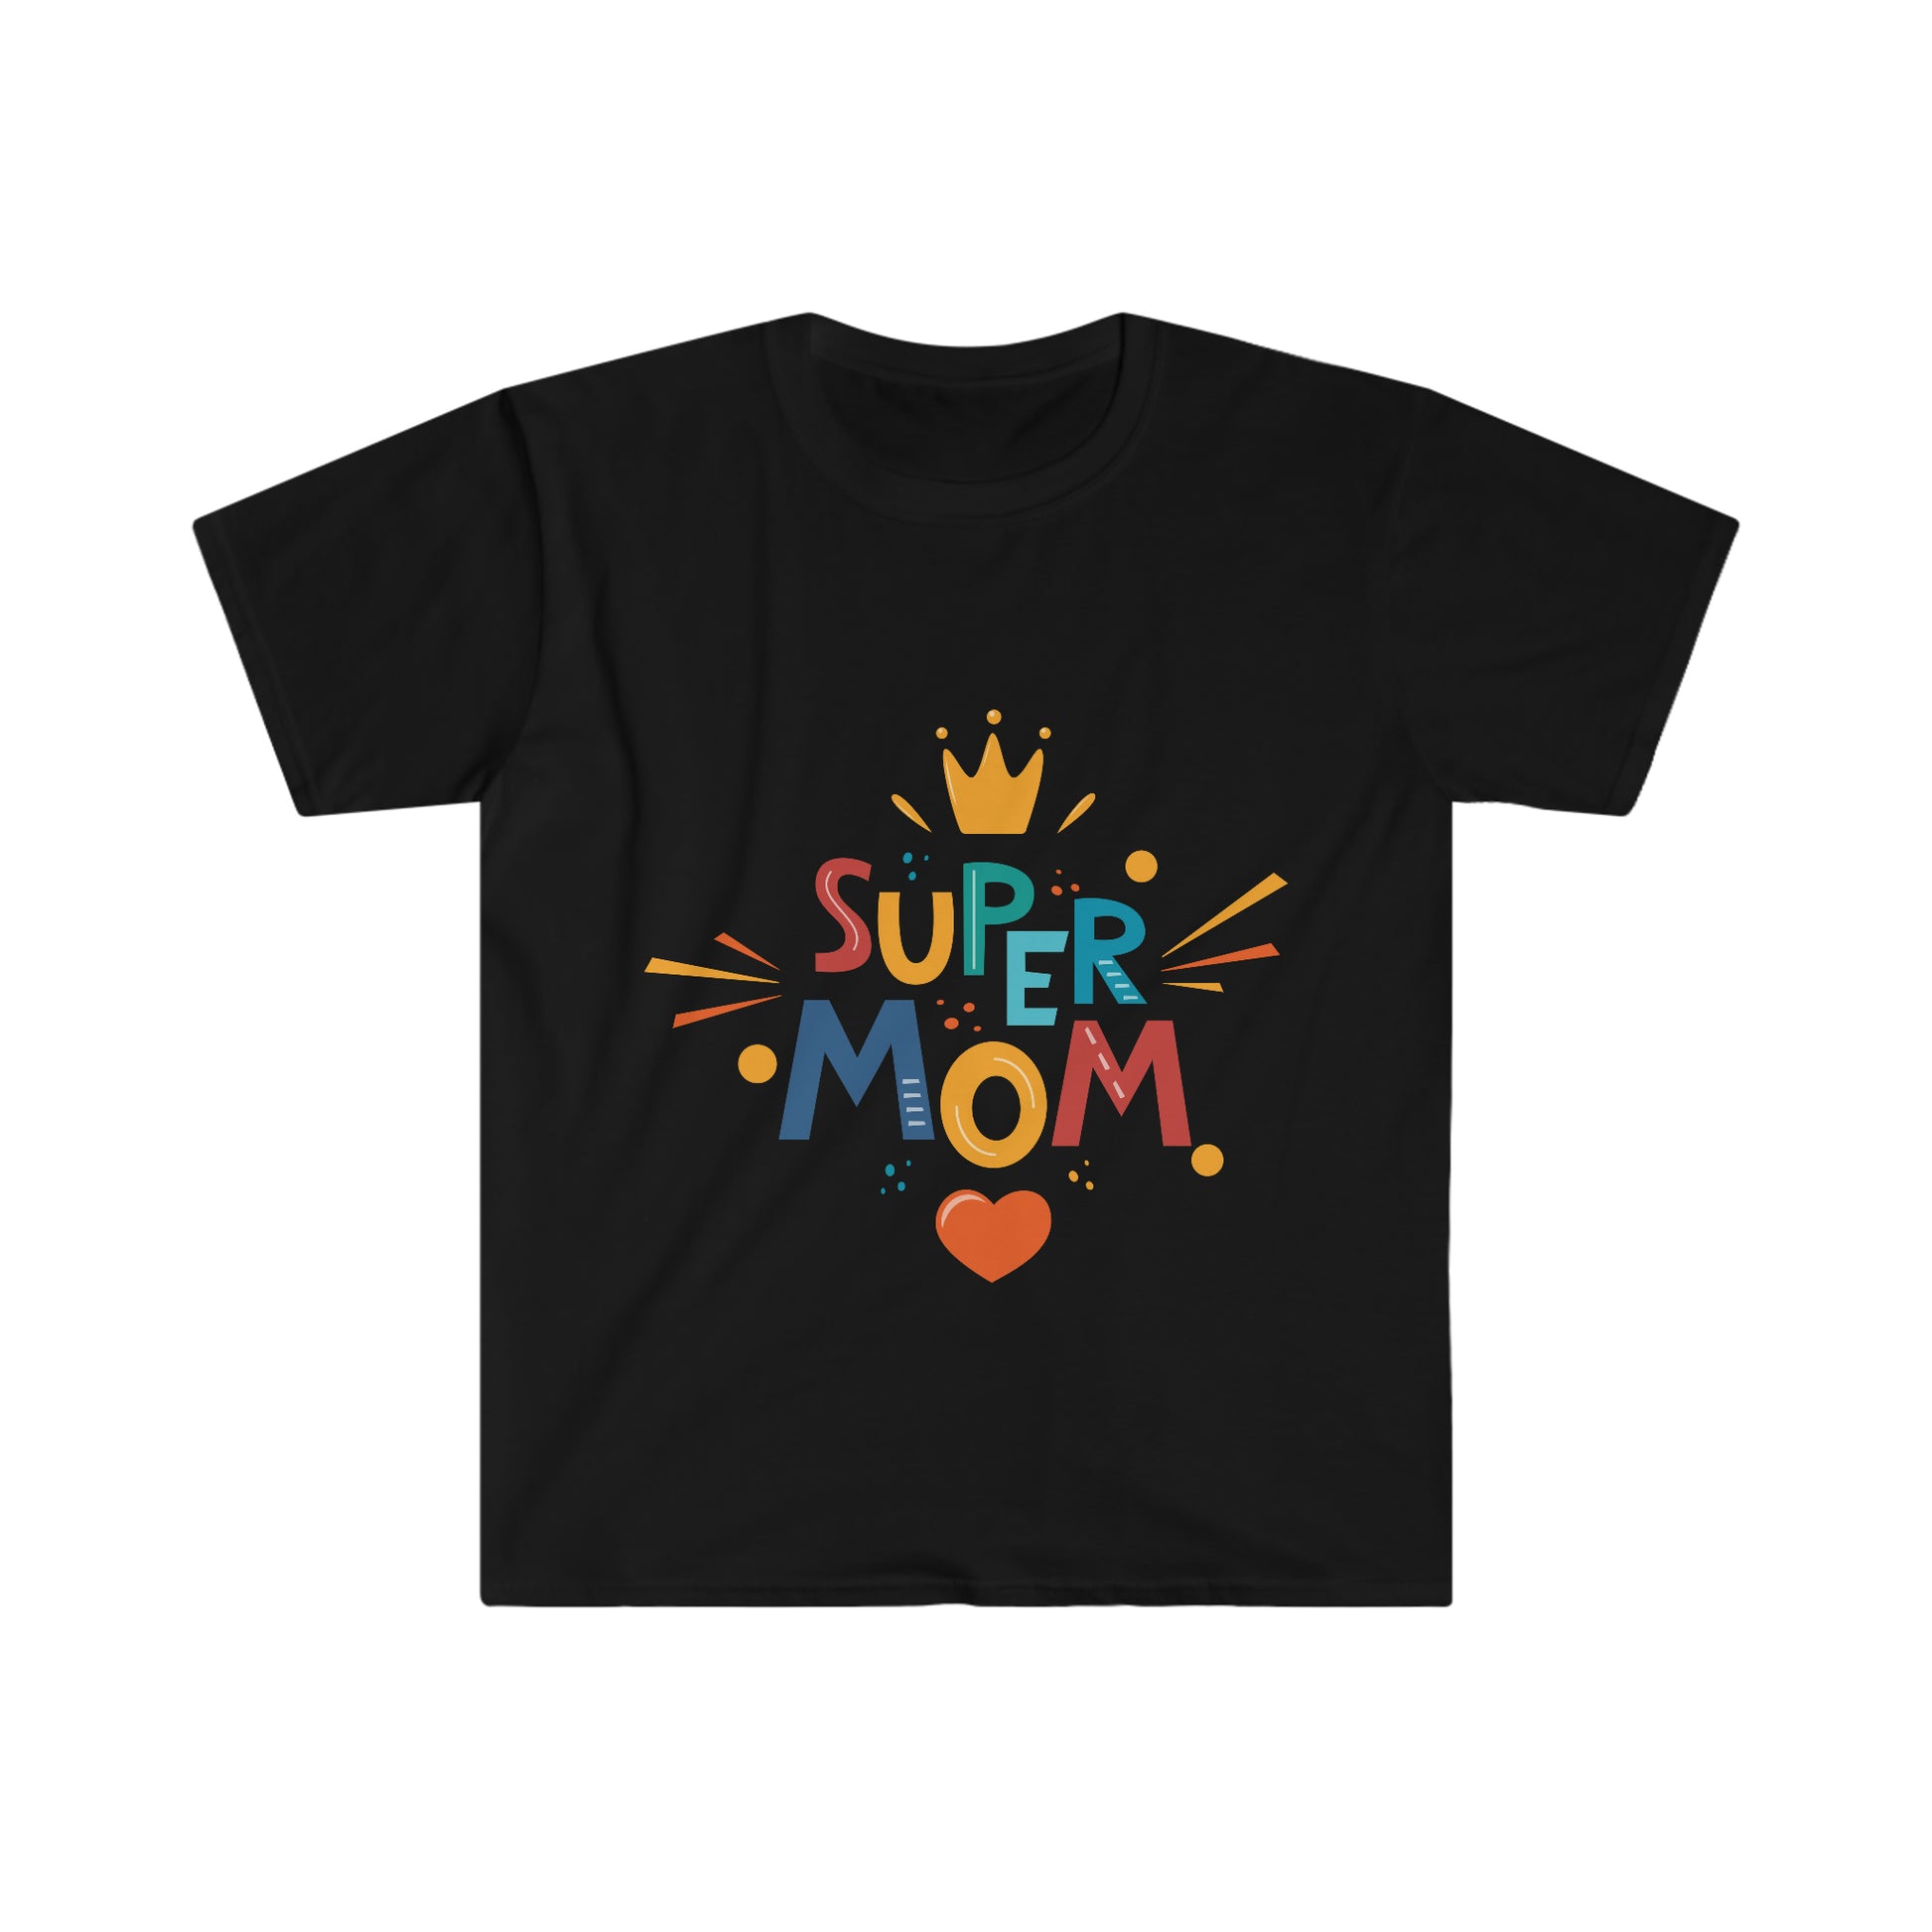 Looking for the perfect Mother's Day gift? Surprise Mom with our 100% cotton Super Mom black softstyle t-shirt